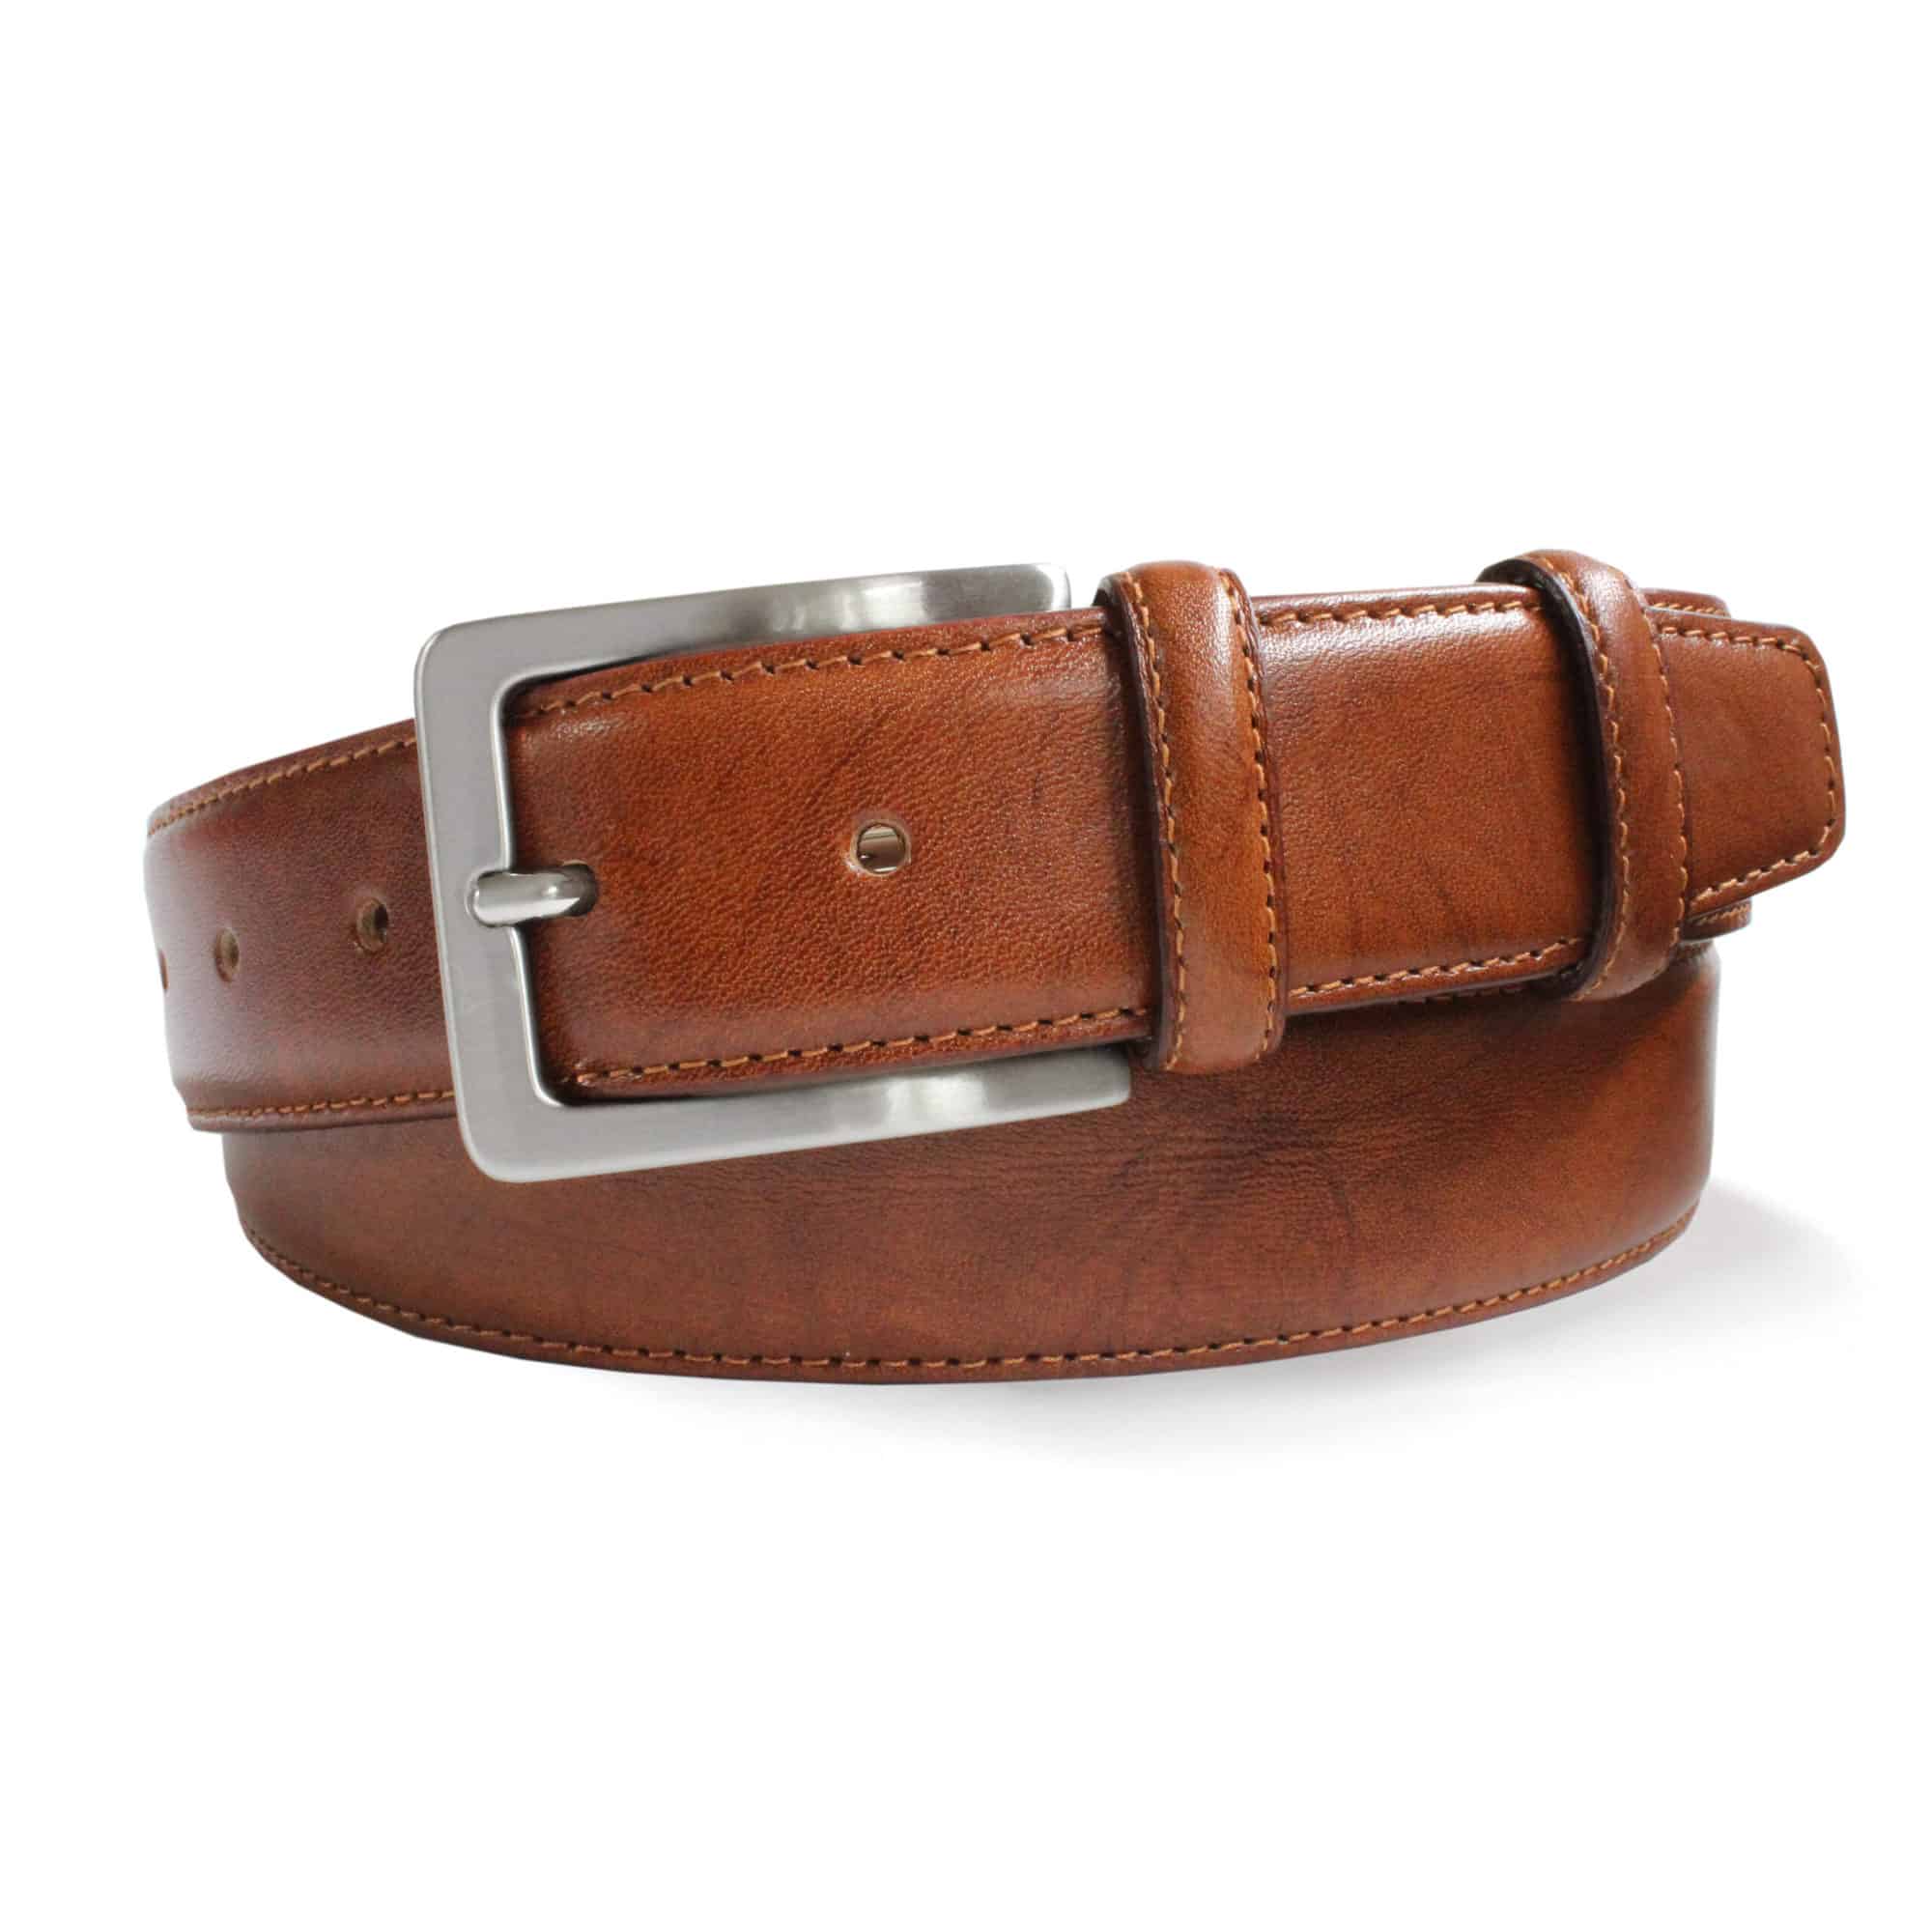 Tan Belt by Smart Clothes York Yorkshire